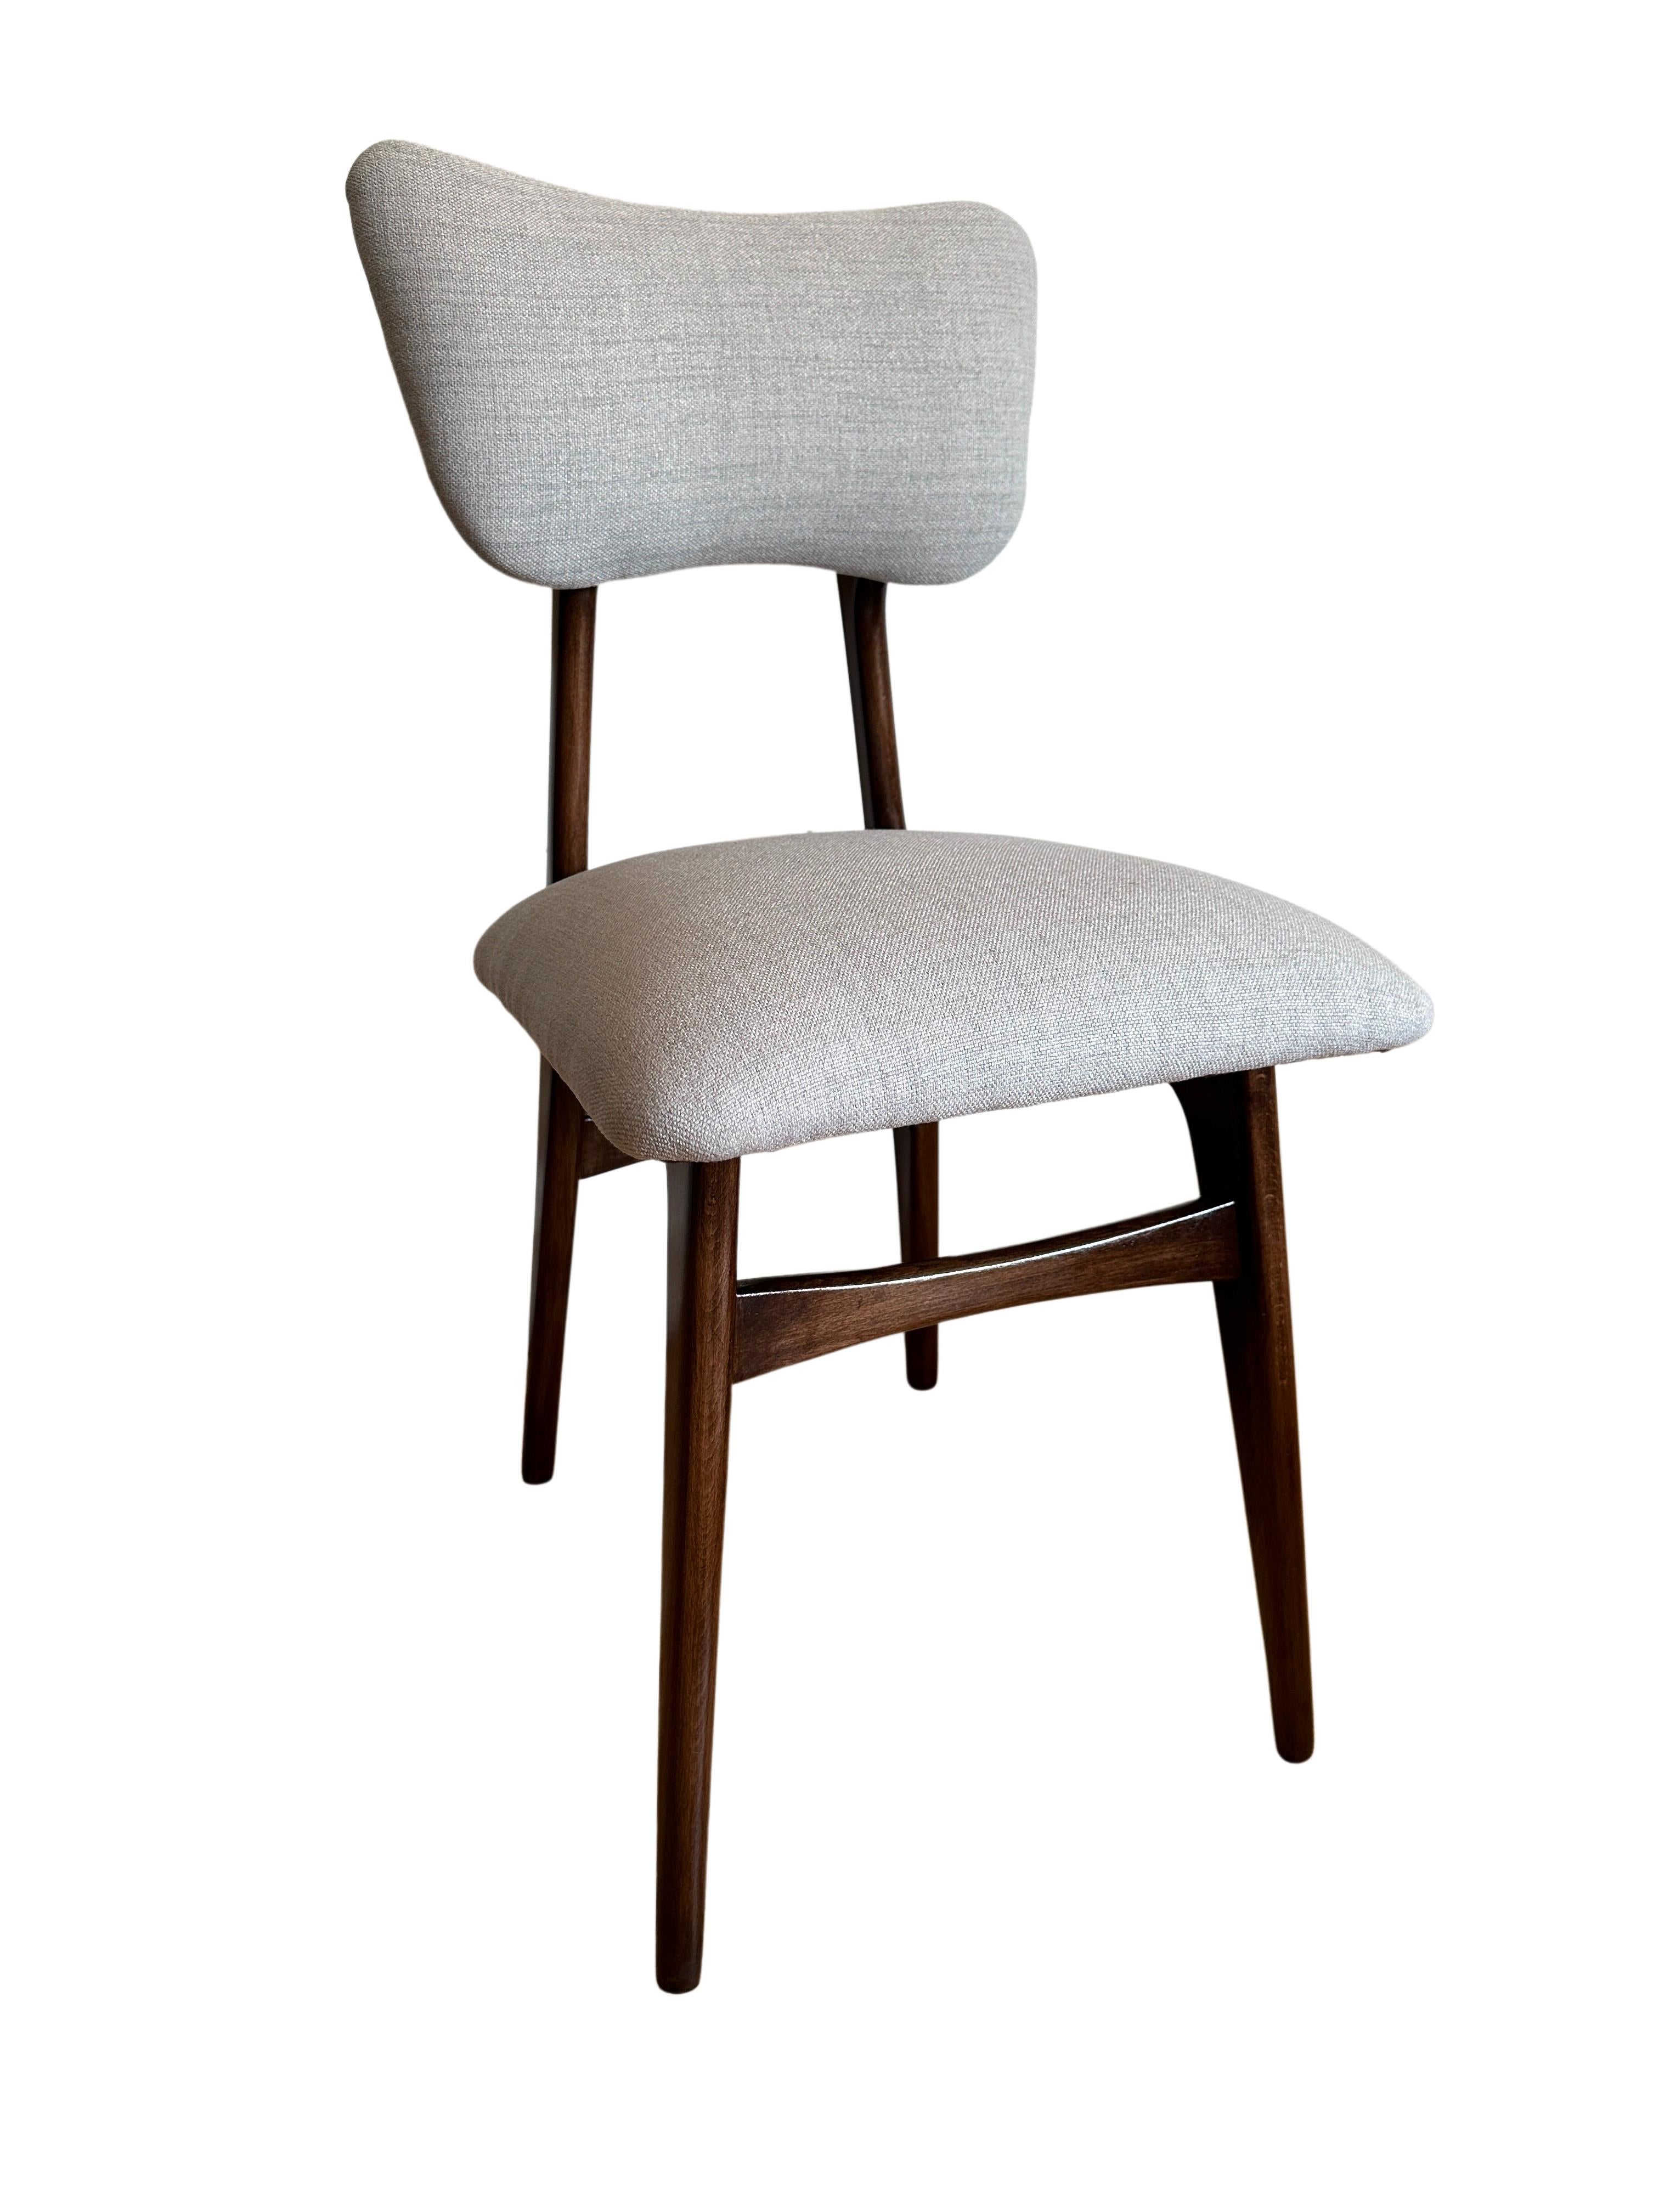 Mid Century Wooden Dining Chair in Grey Upholstery, Poland, 1960s For Sale 7